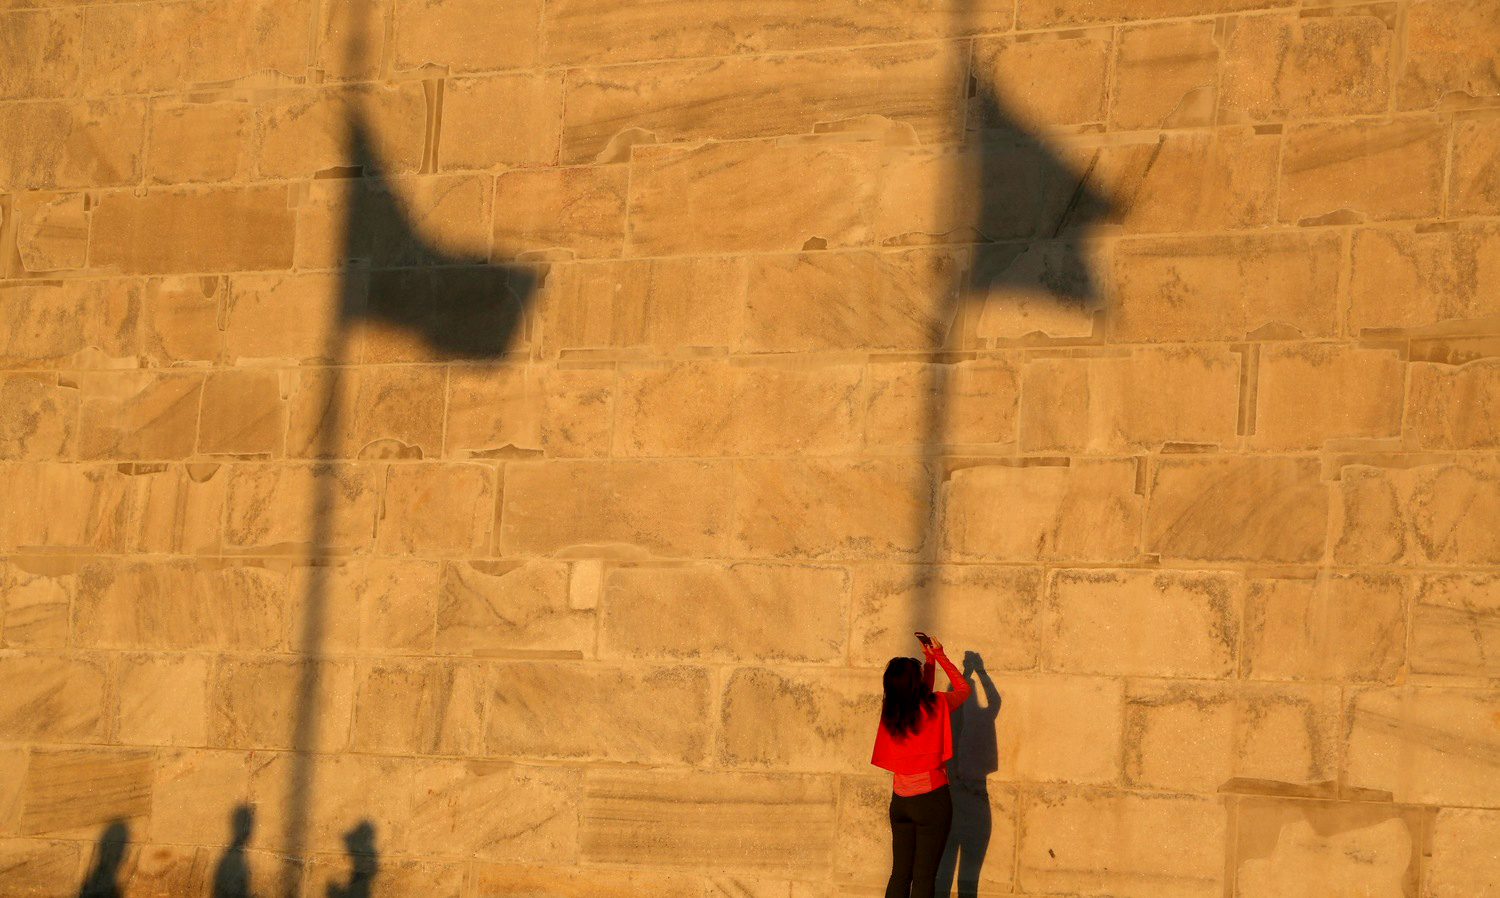  A woman in red takes a picture of the Washington Monument with her cell phone on October 8, 2014. Visitors congregate around the monument as the sun sets in Washington, D.C. 